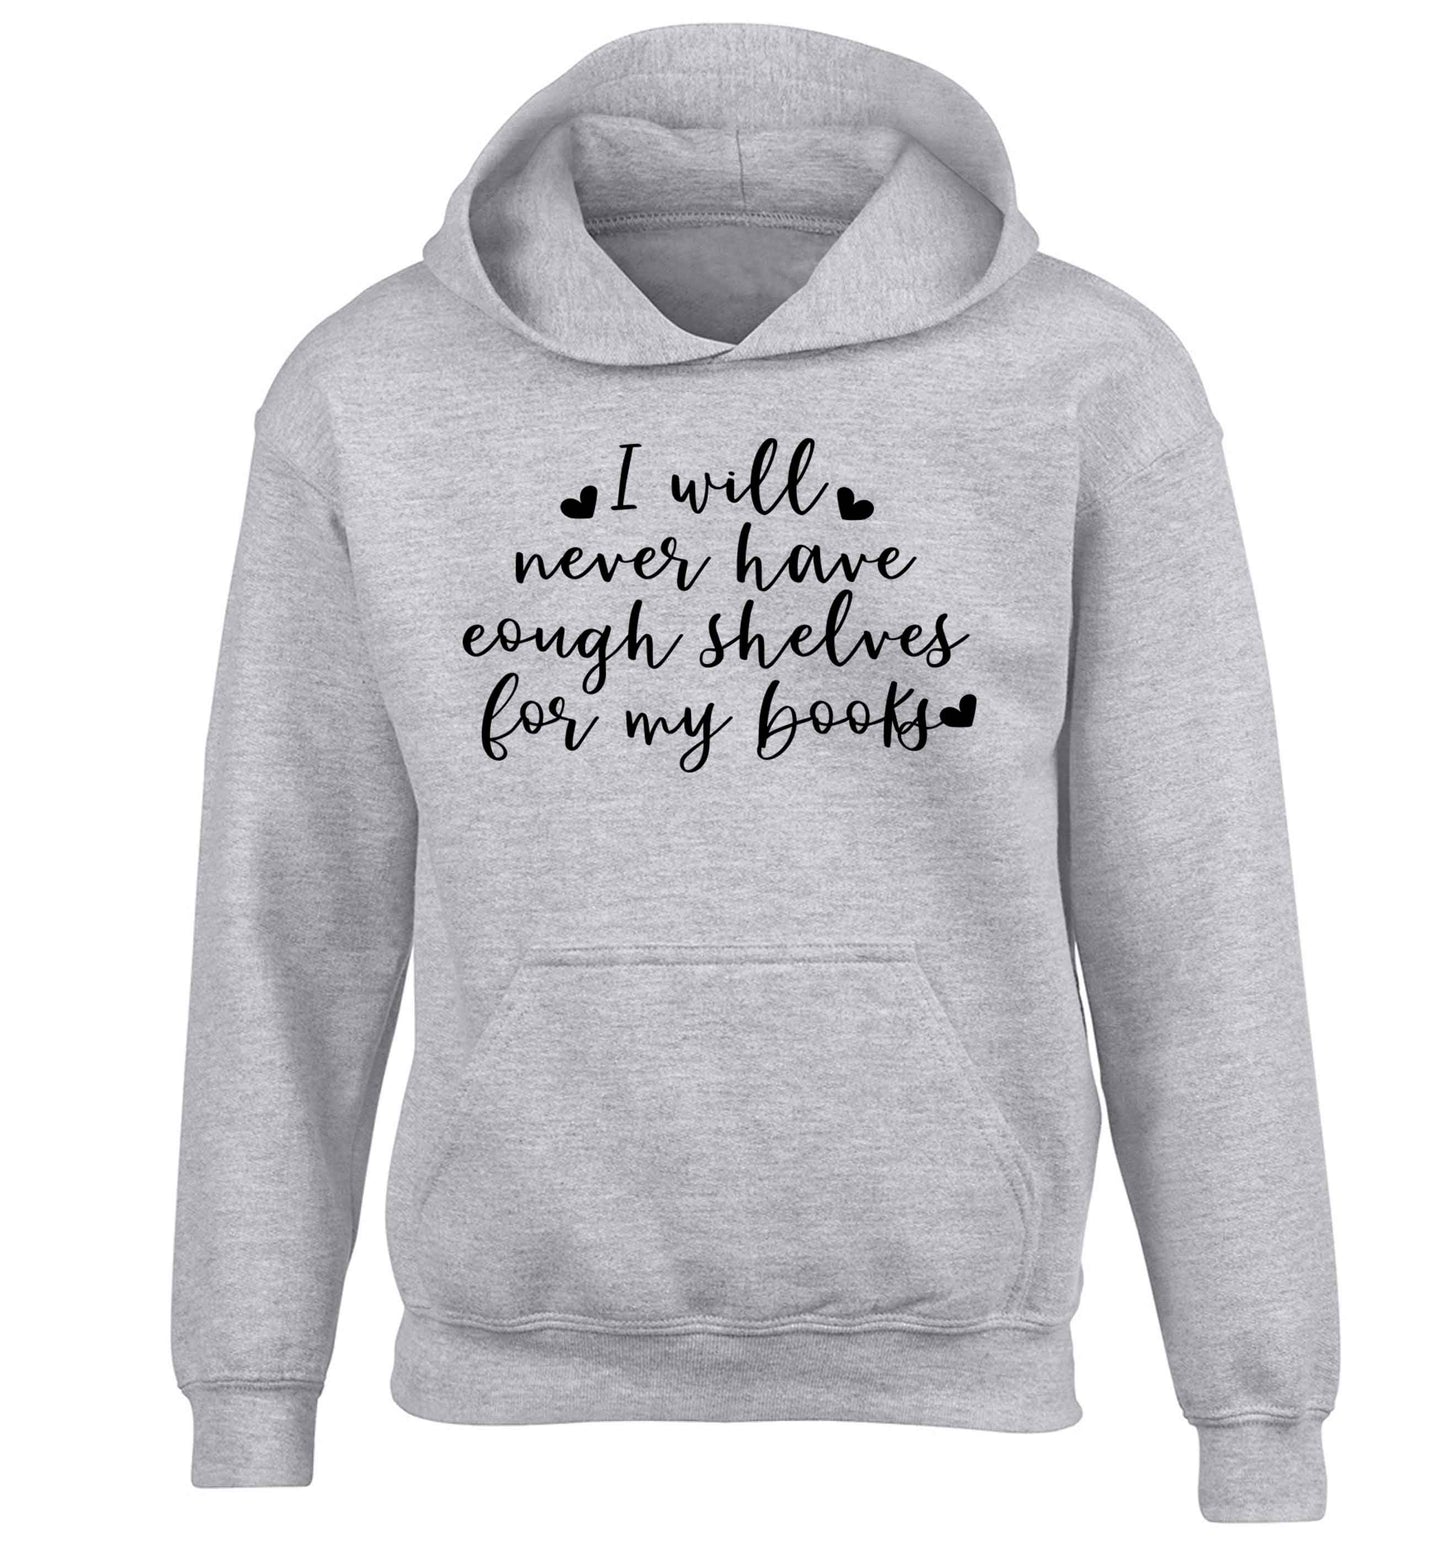 I will never have enough shelves for my books children's grey hoodie 12-13 Years